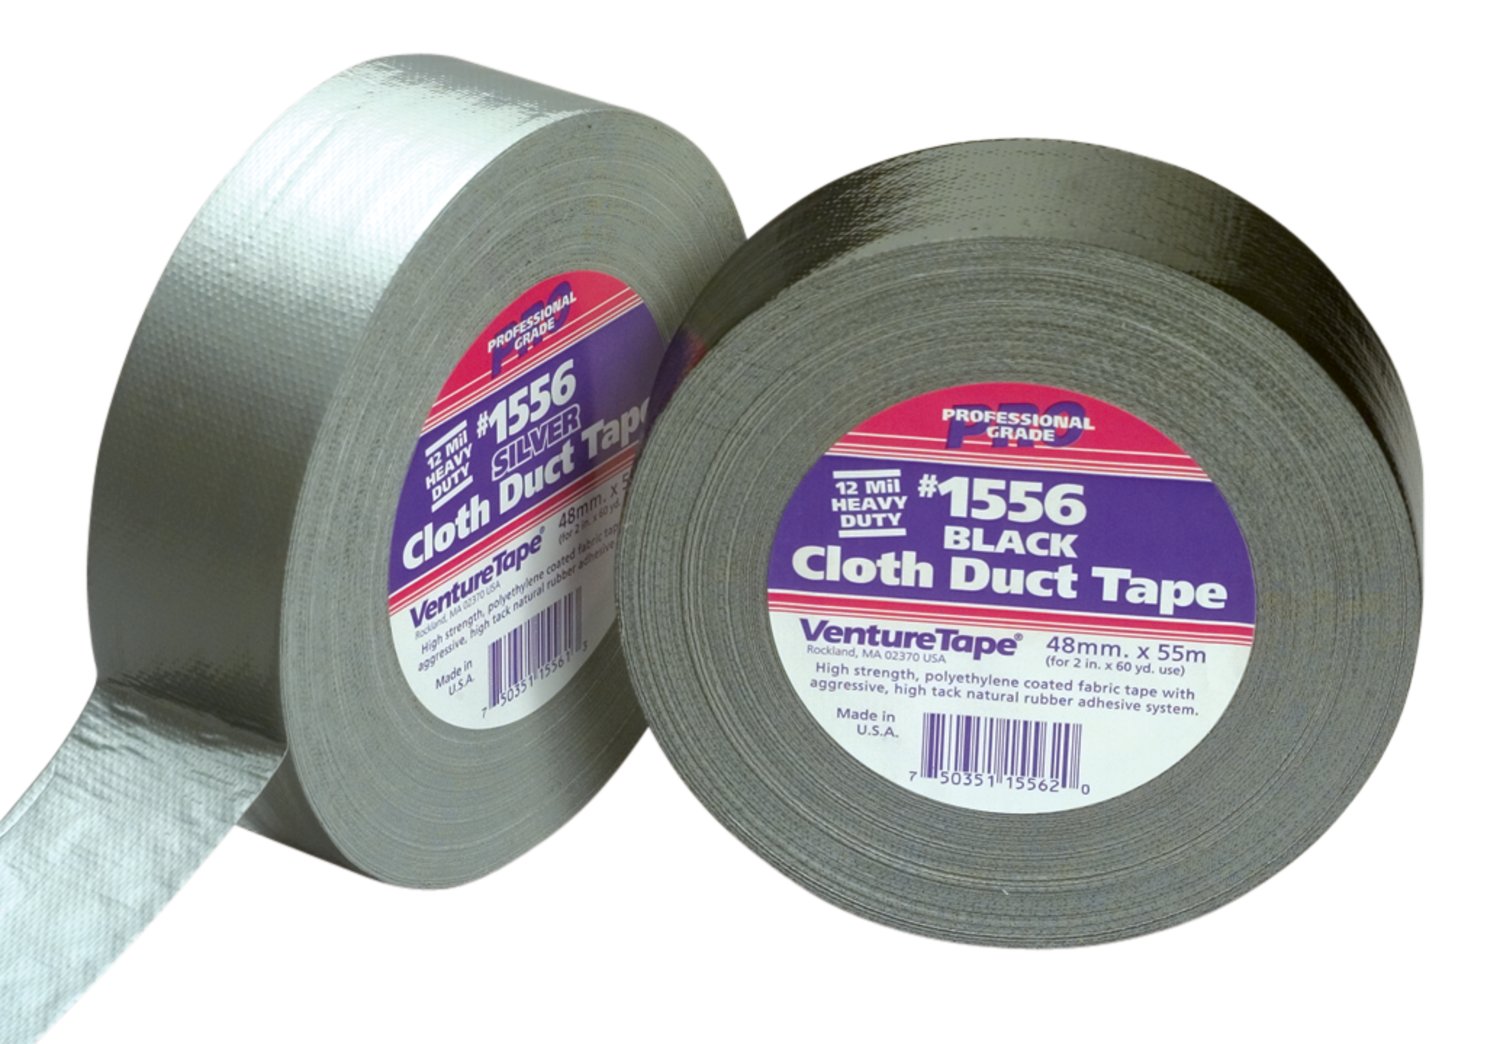 7010378551 - 3M Venture Tape High Performance Cloth Duct Tape 1556, Silver, 48 mm x
55 m (1.88 in x 60.1 yd), 24/Case